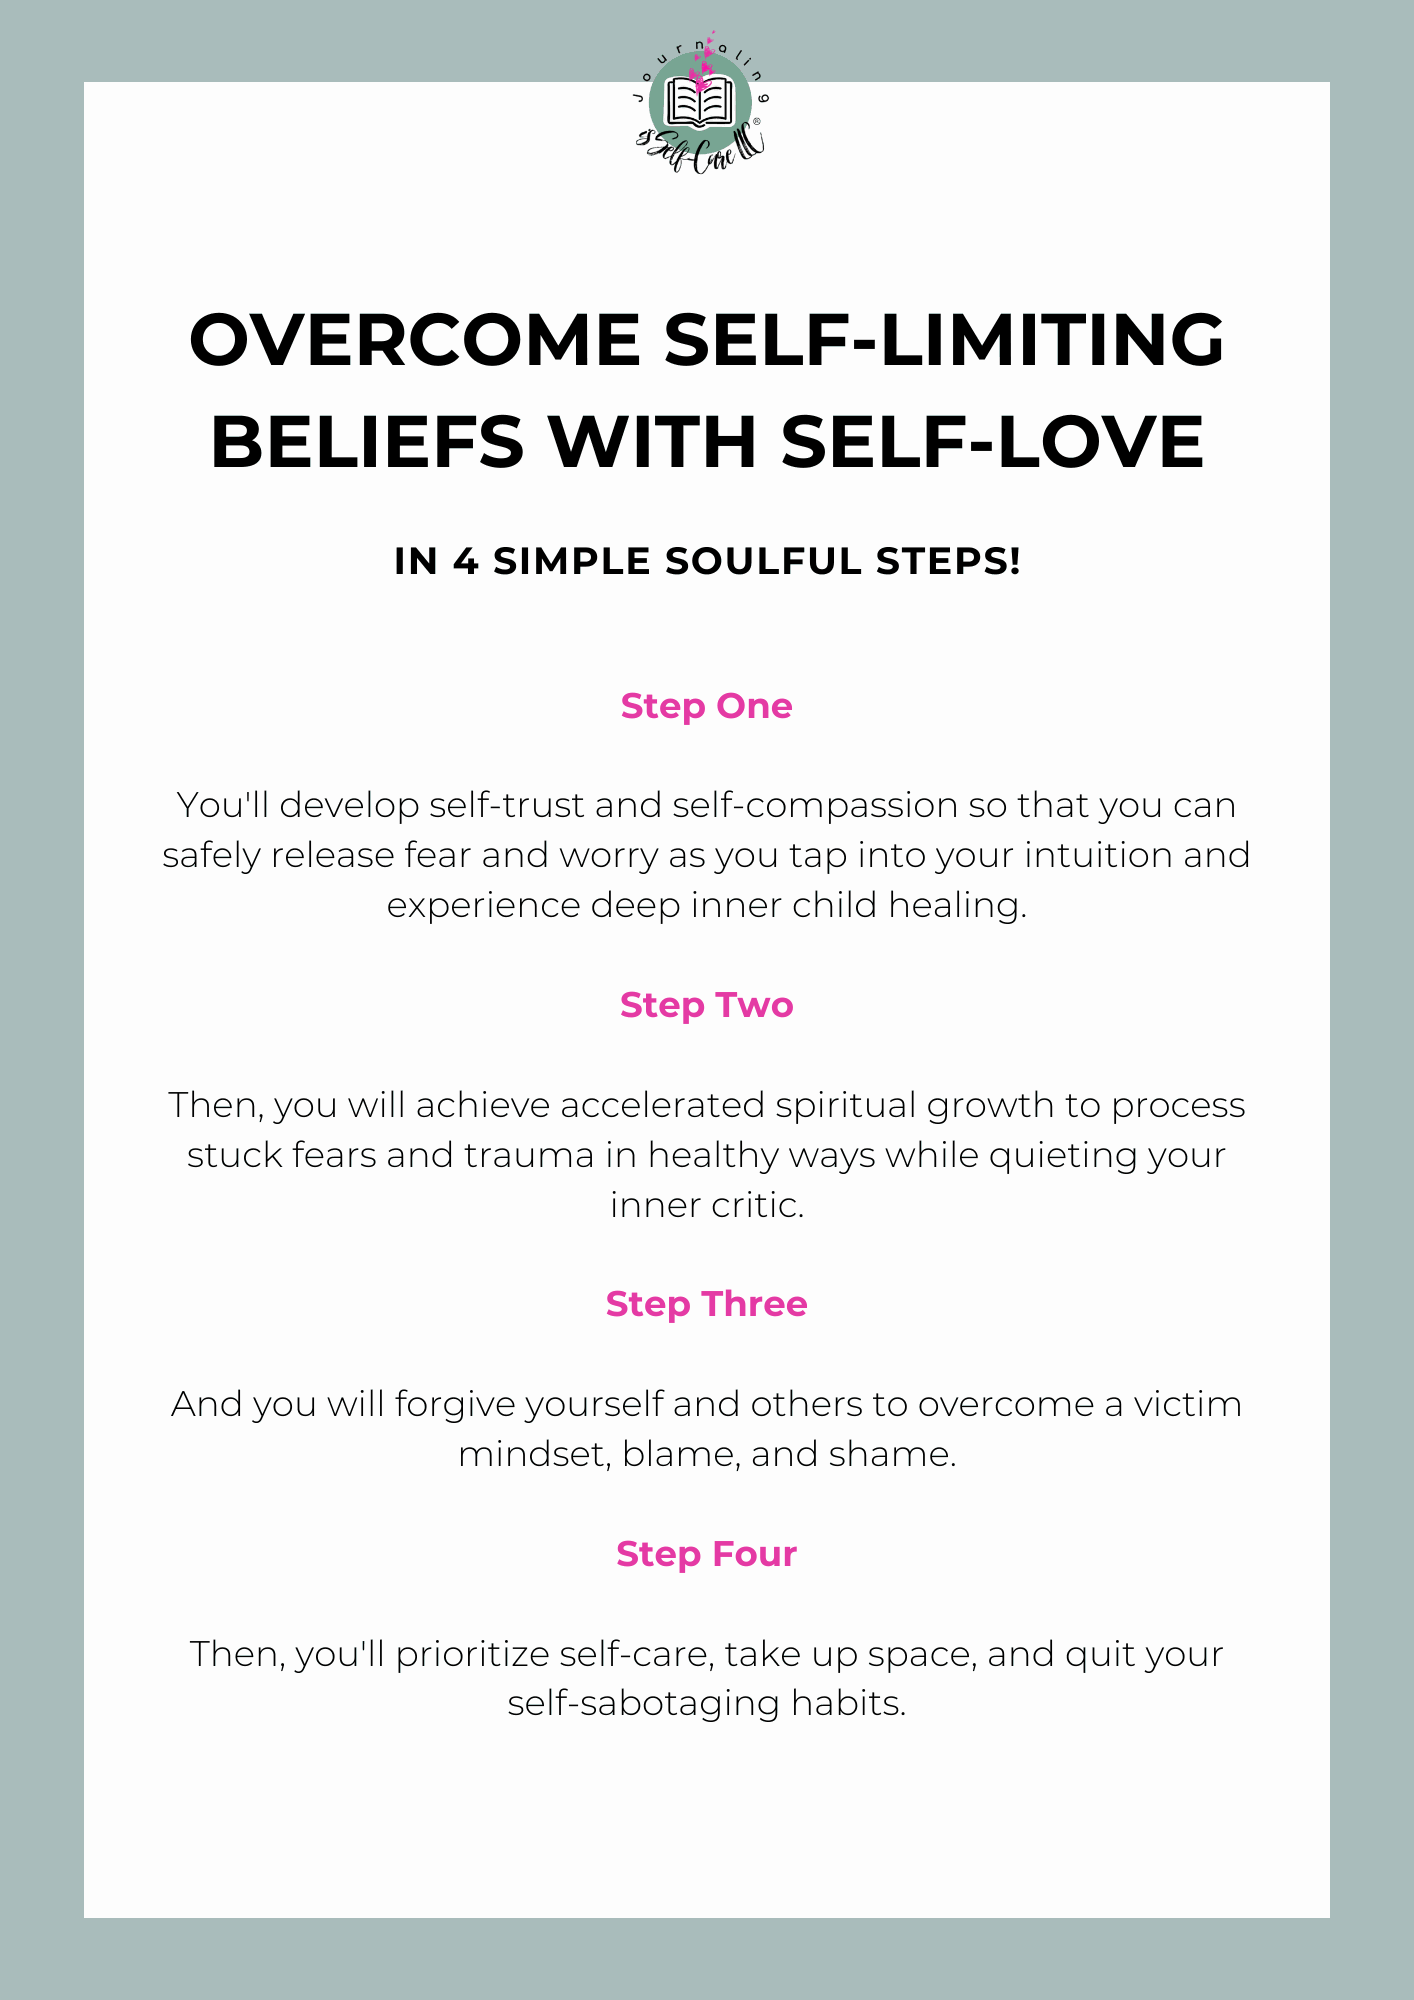 Boost confidence and let go of self-limiting beliefs with Overcome Self-Limiting Beliefs with Self-Love (Virtual Course).